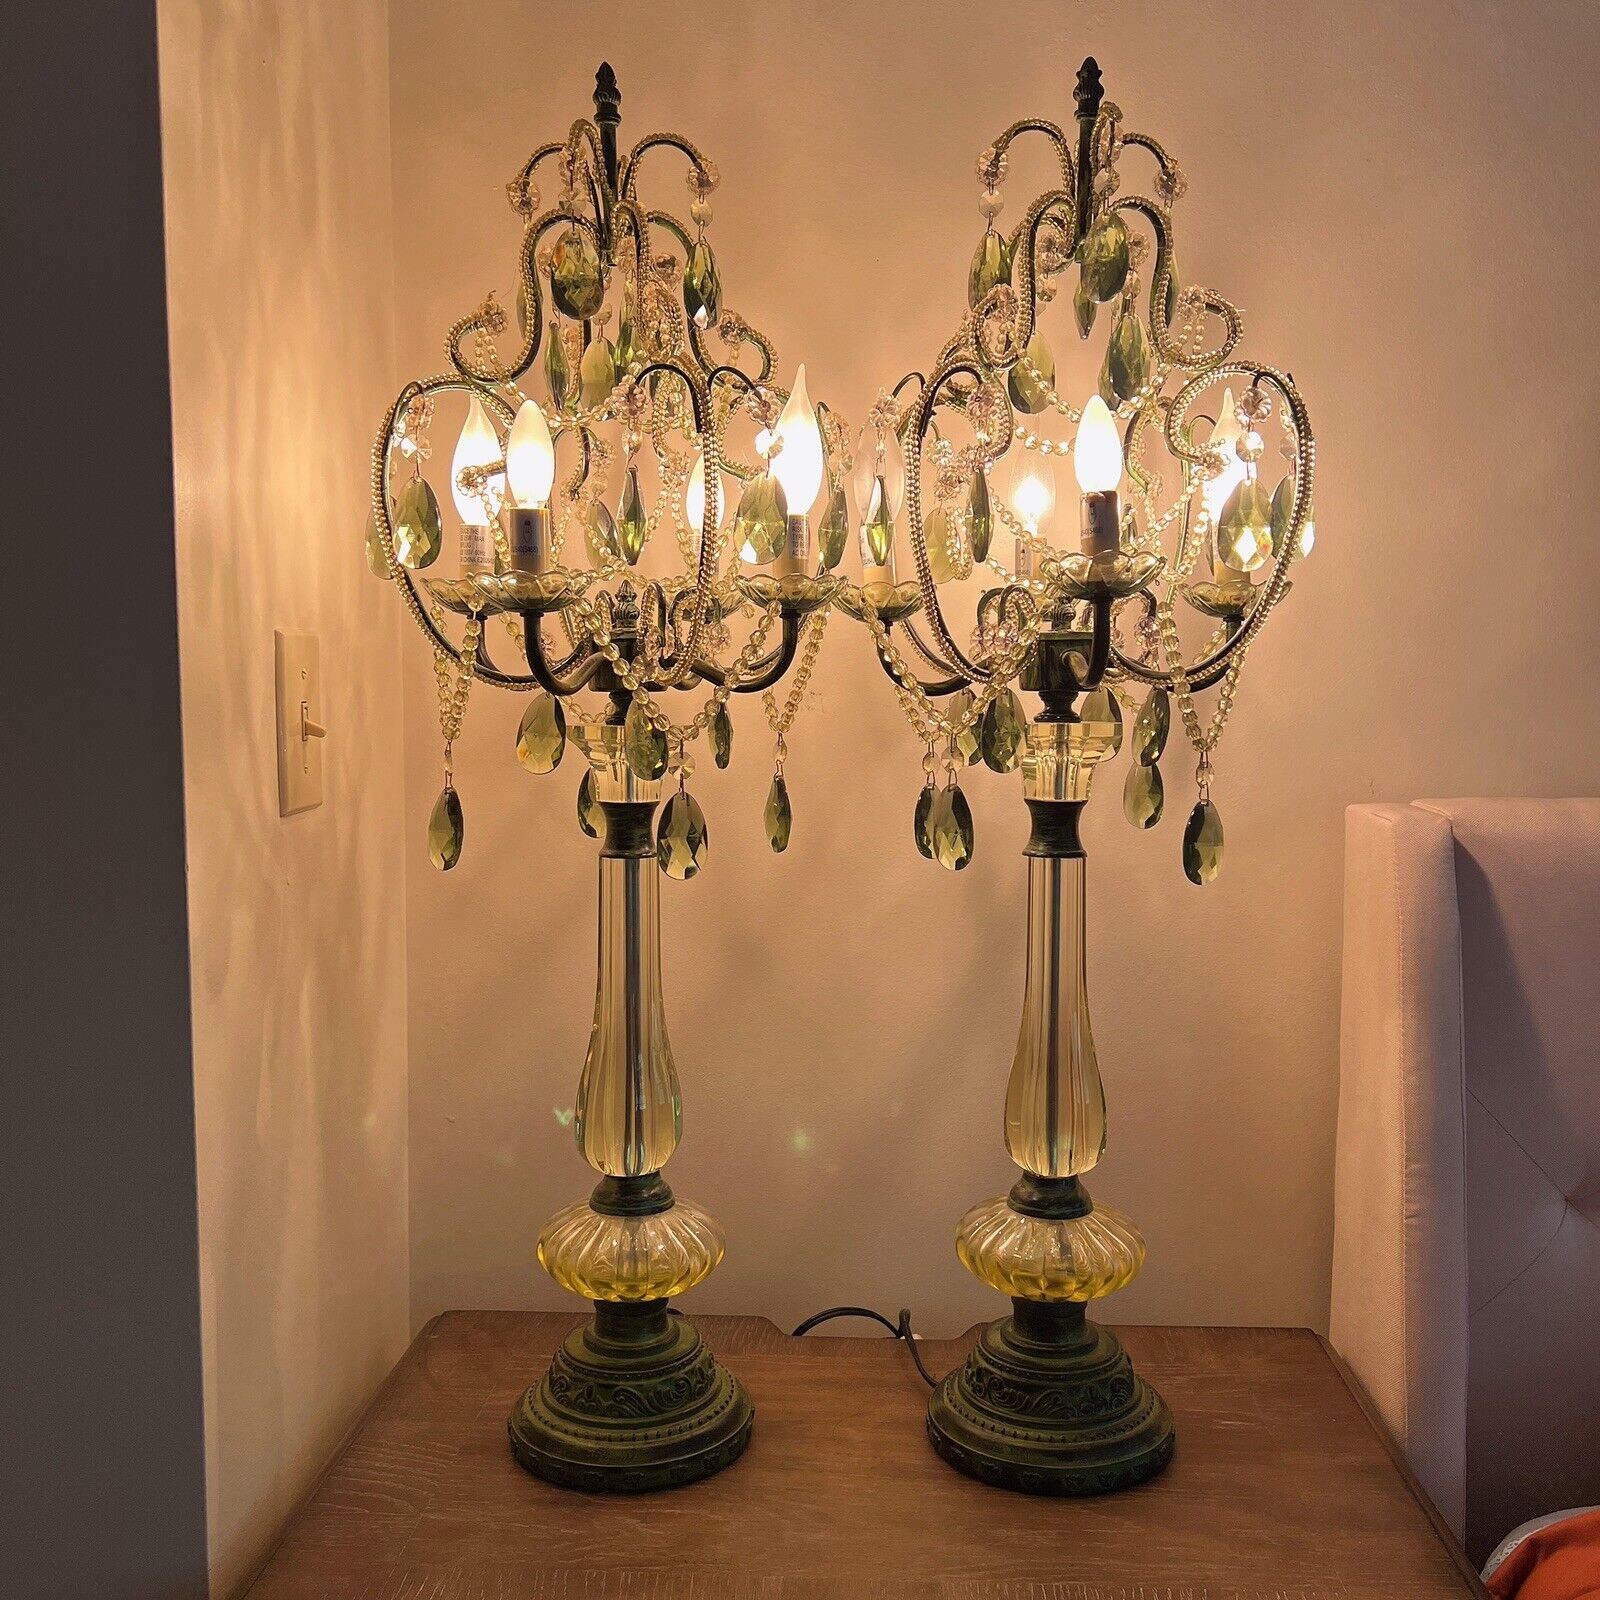 Grouping of (2) Vintage Antique Style Chandelier Acrylic Lucite Table Lamps